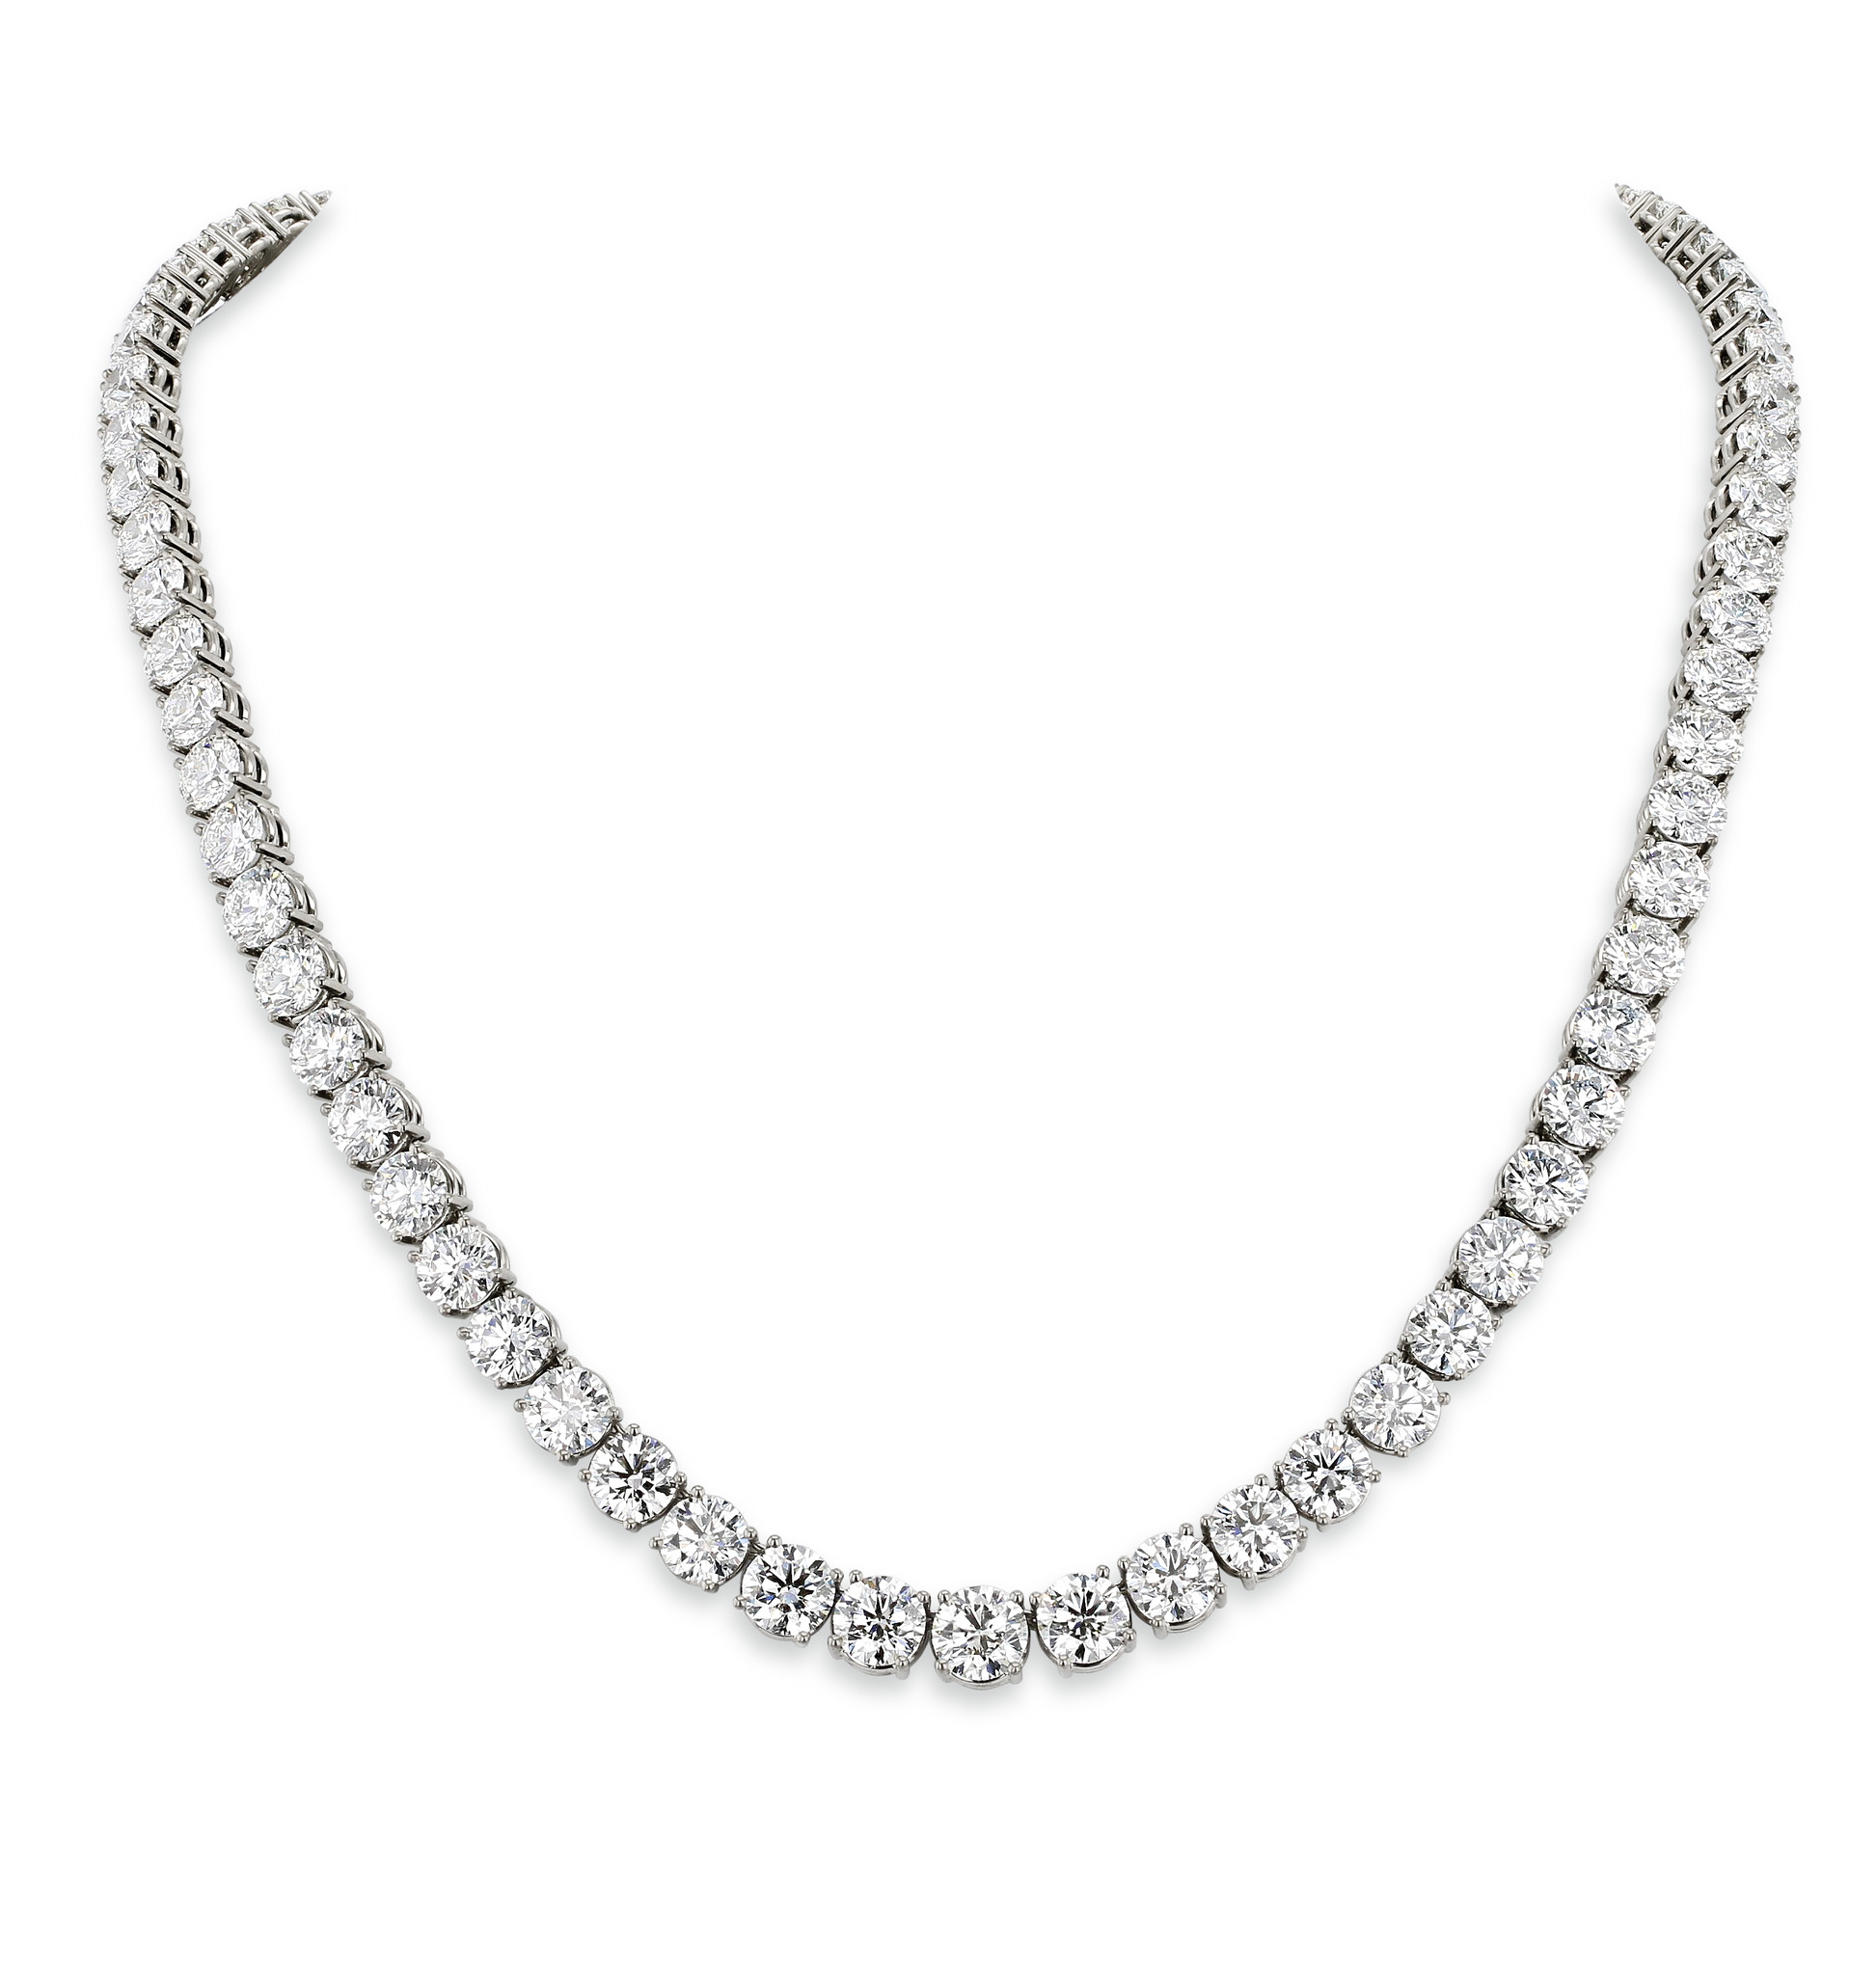 Riviere necklace with diamonds